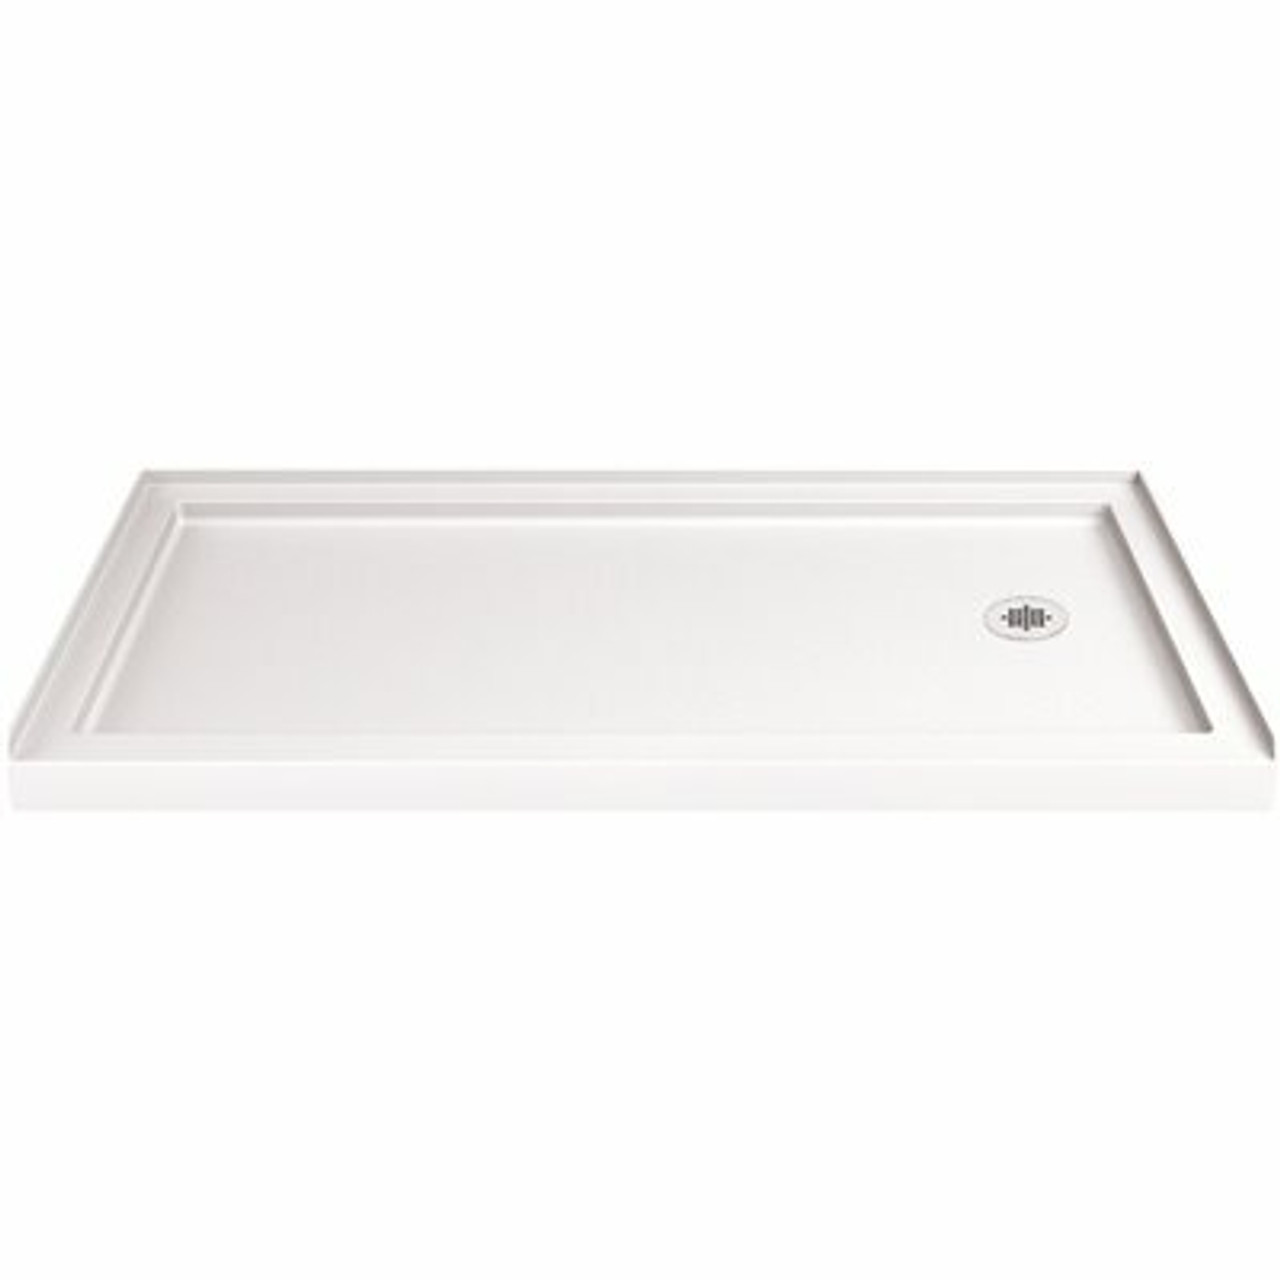 Dreamline Slimline 36 In. D X 60 In. W Single Threshold Shower Base In White With Right Hand Drain